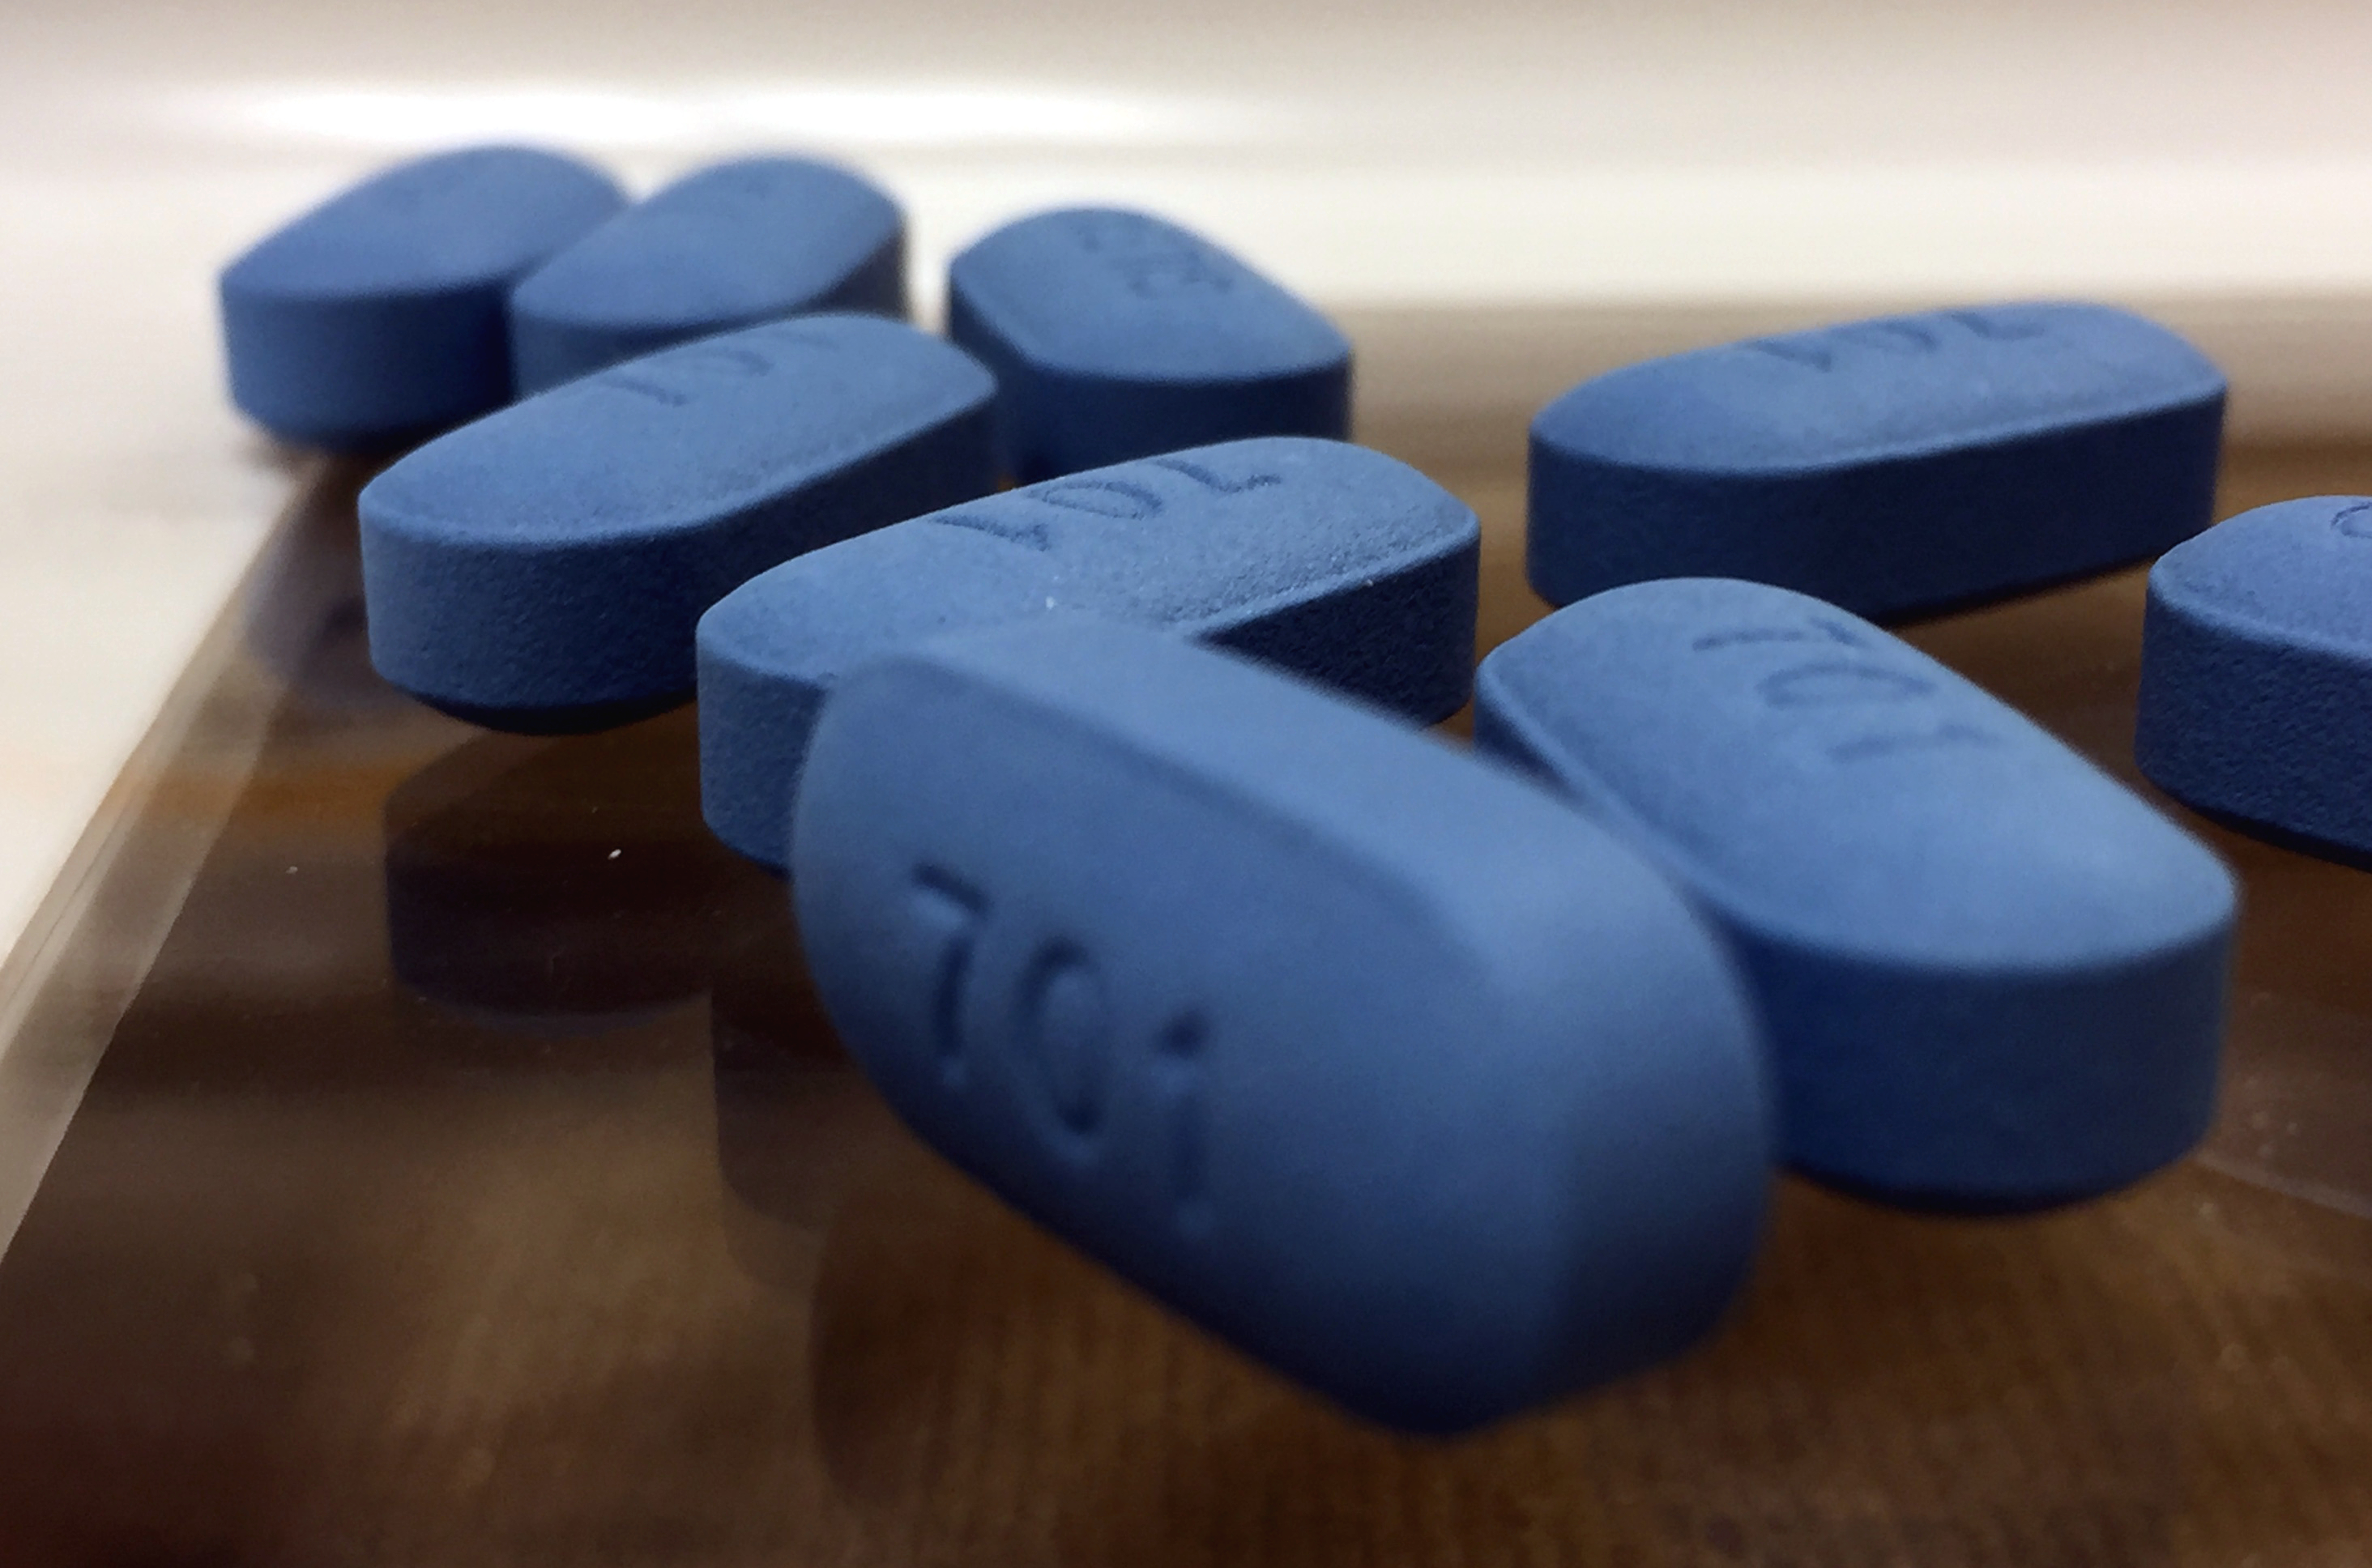 Resources for more information about Truvada side effects